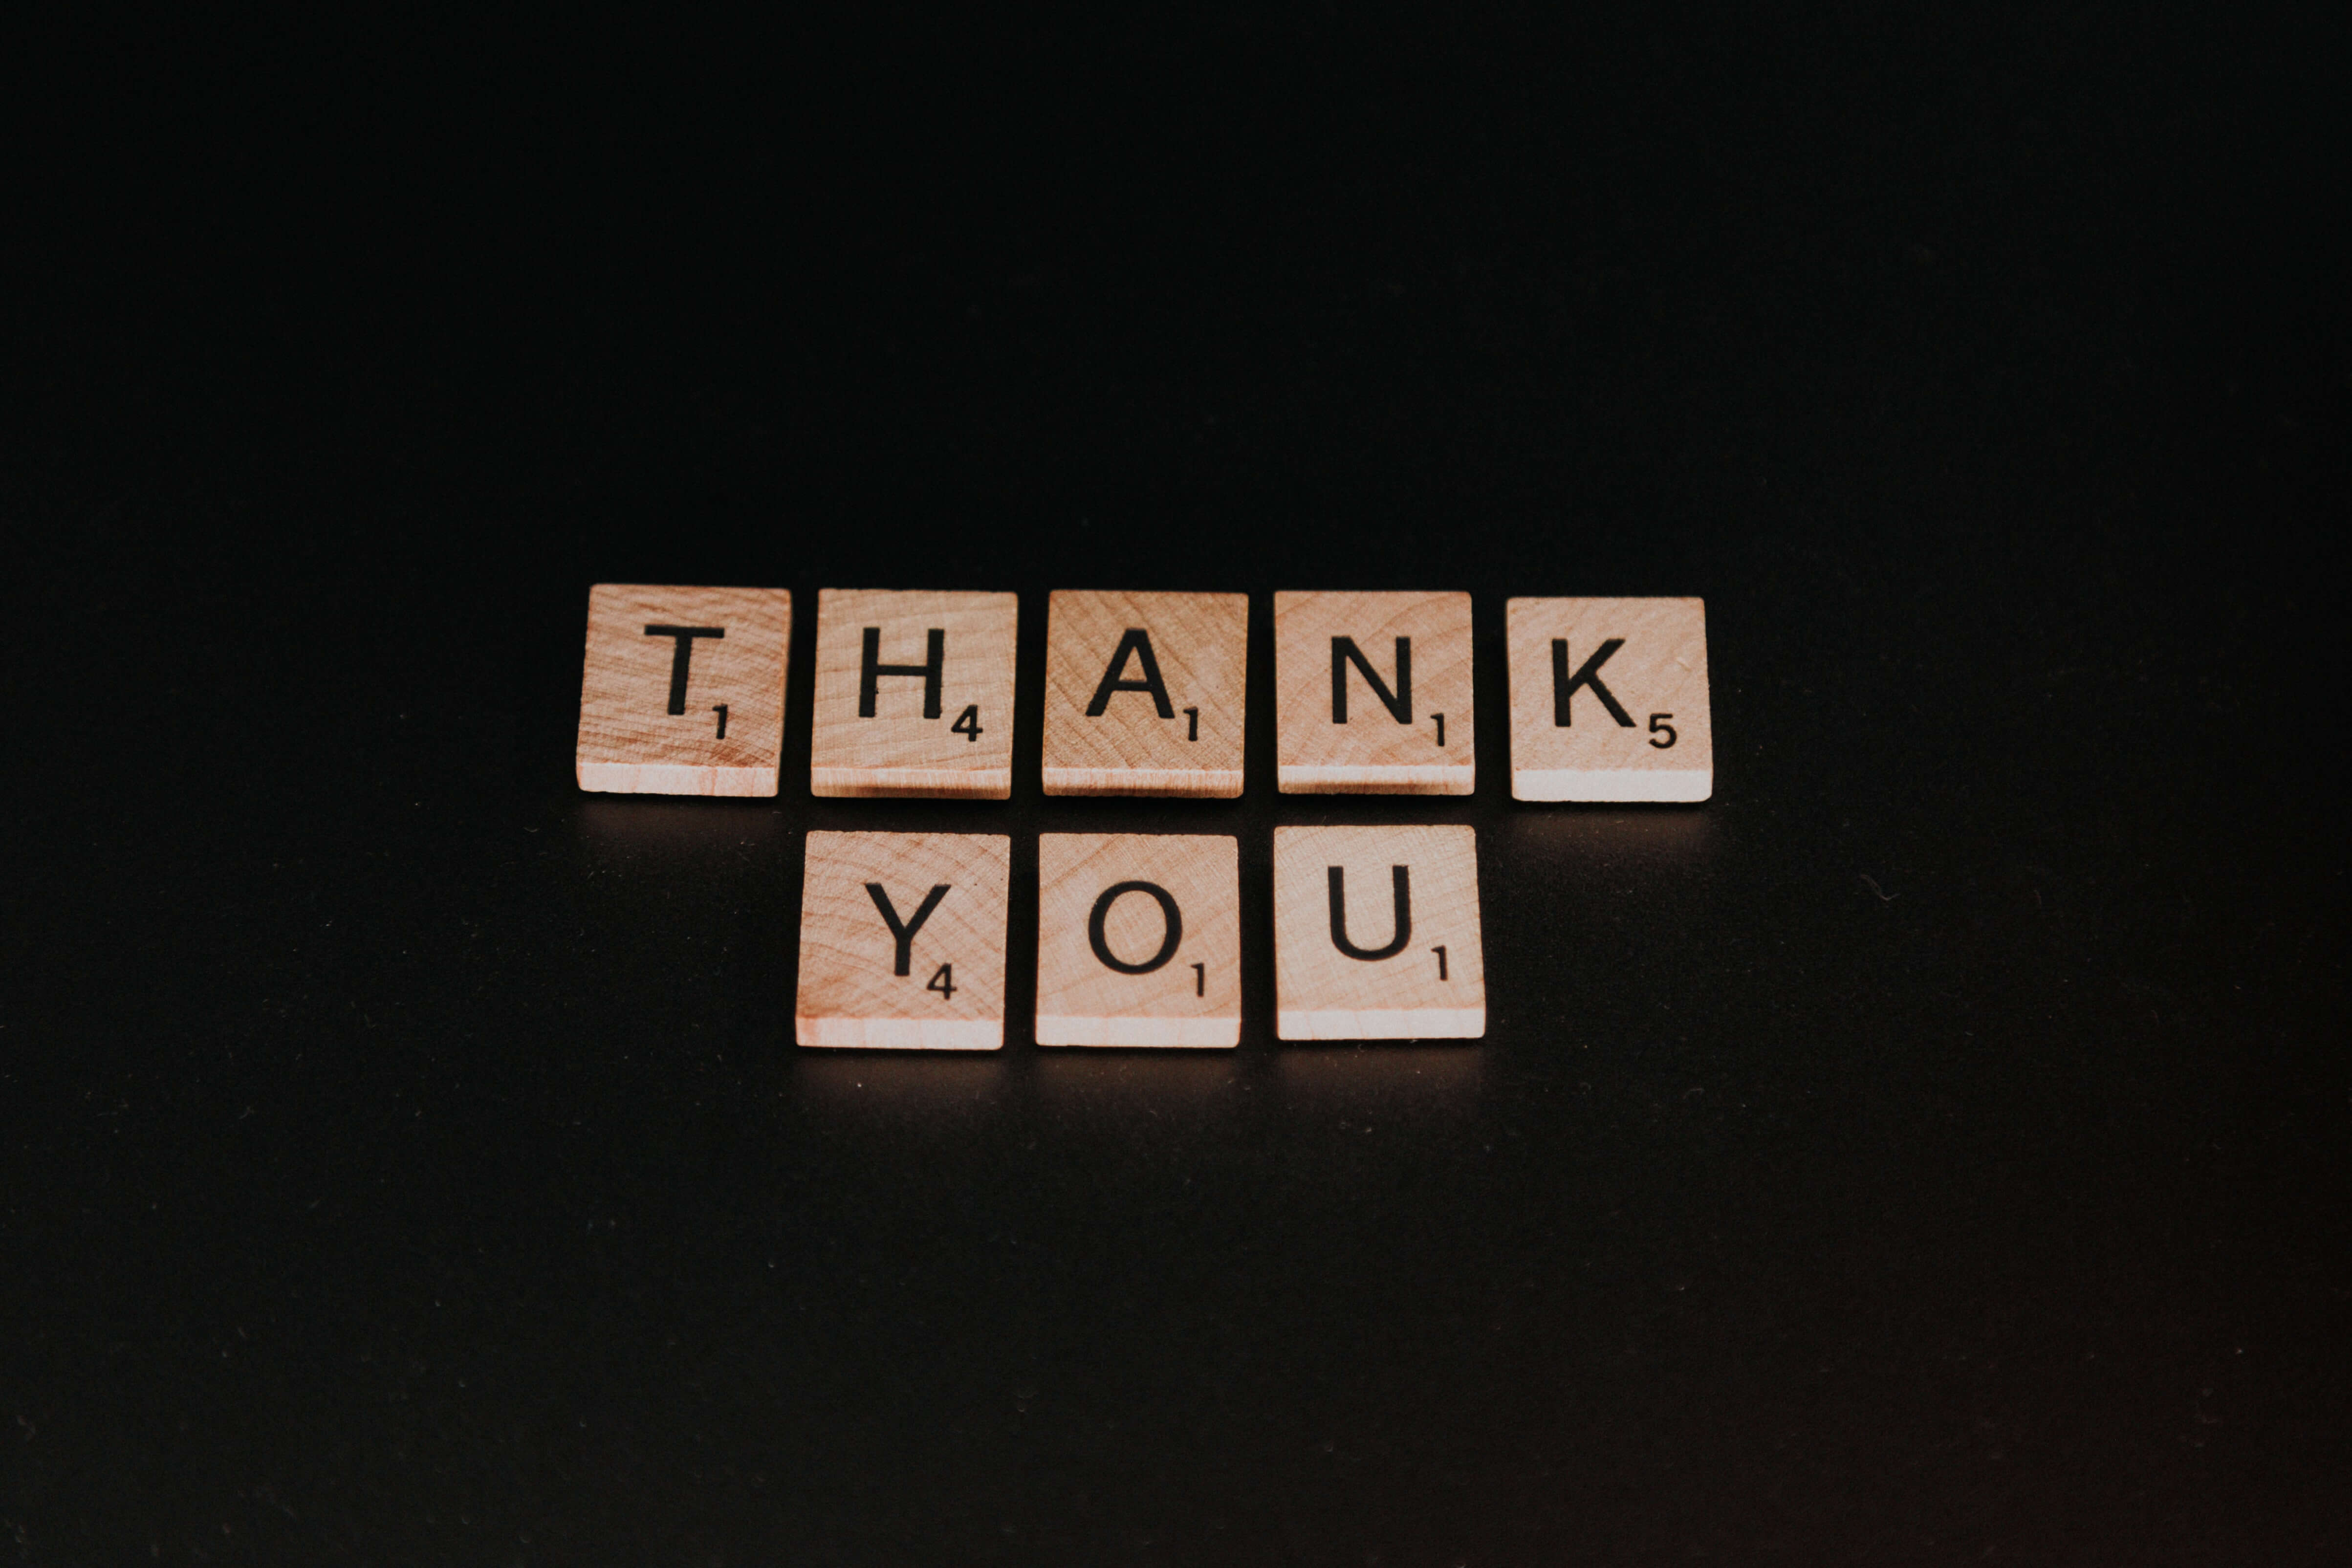 Scrabble tiles spell out "Thank You" on a black background.